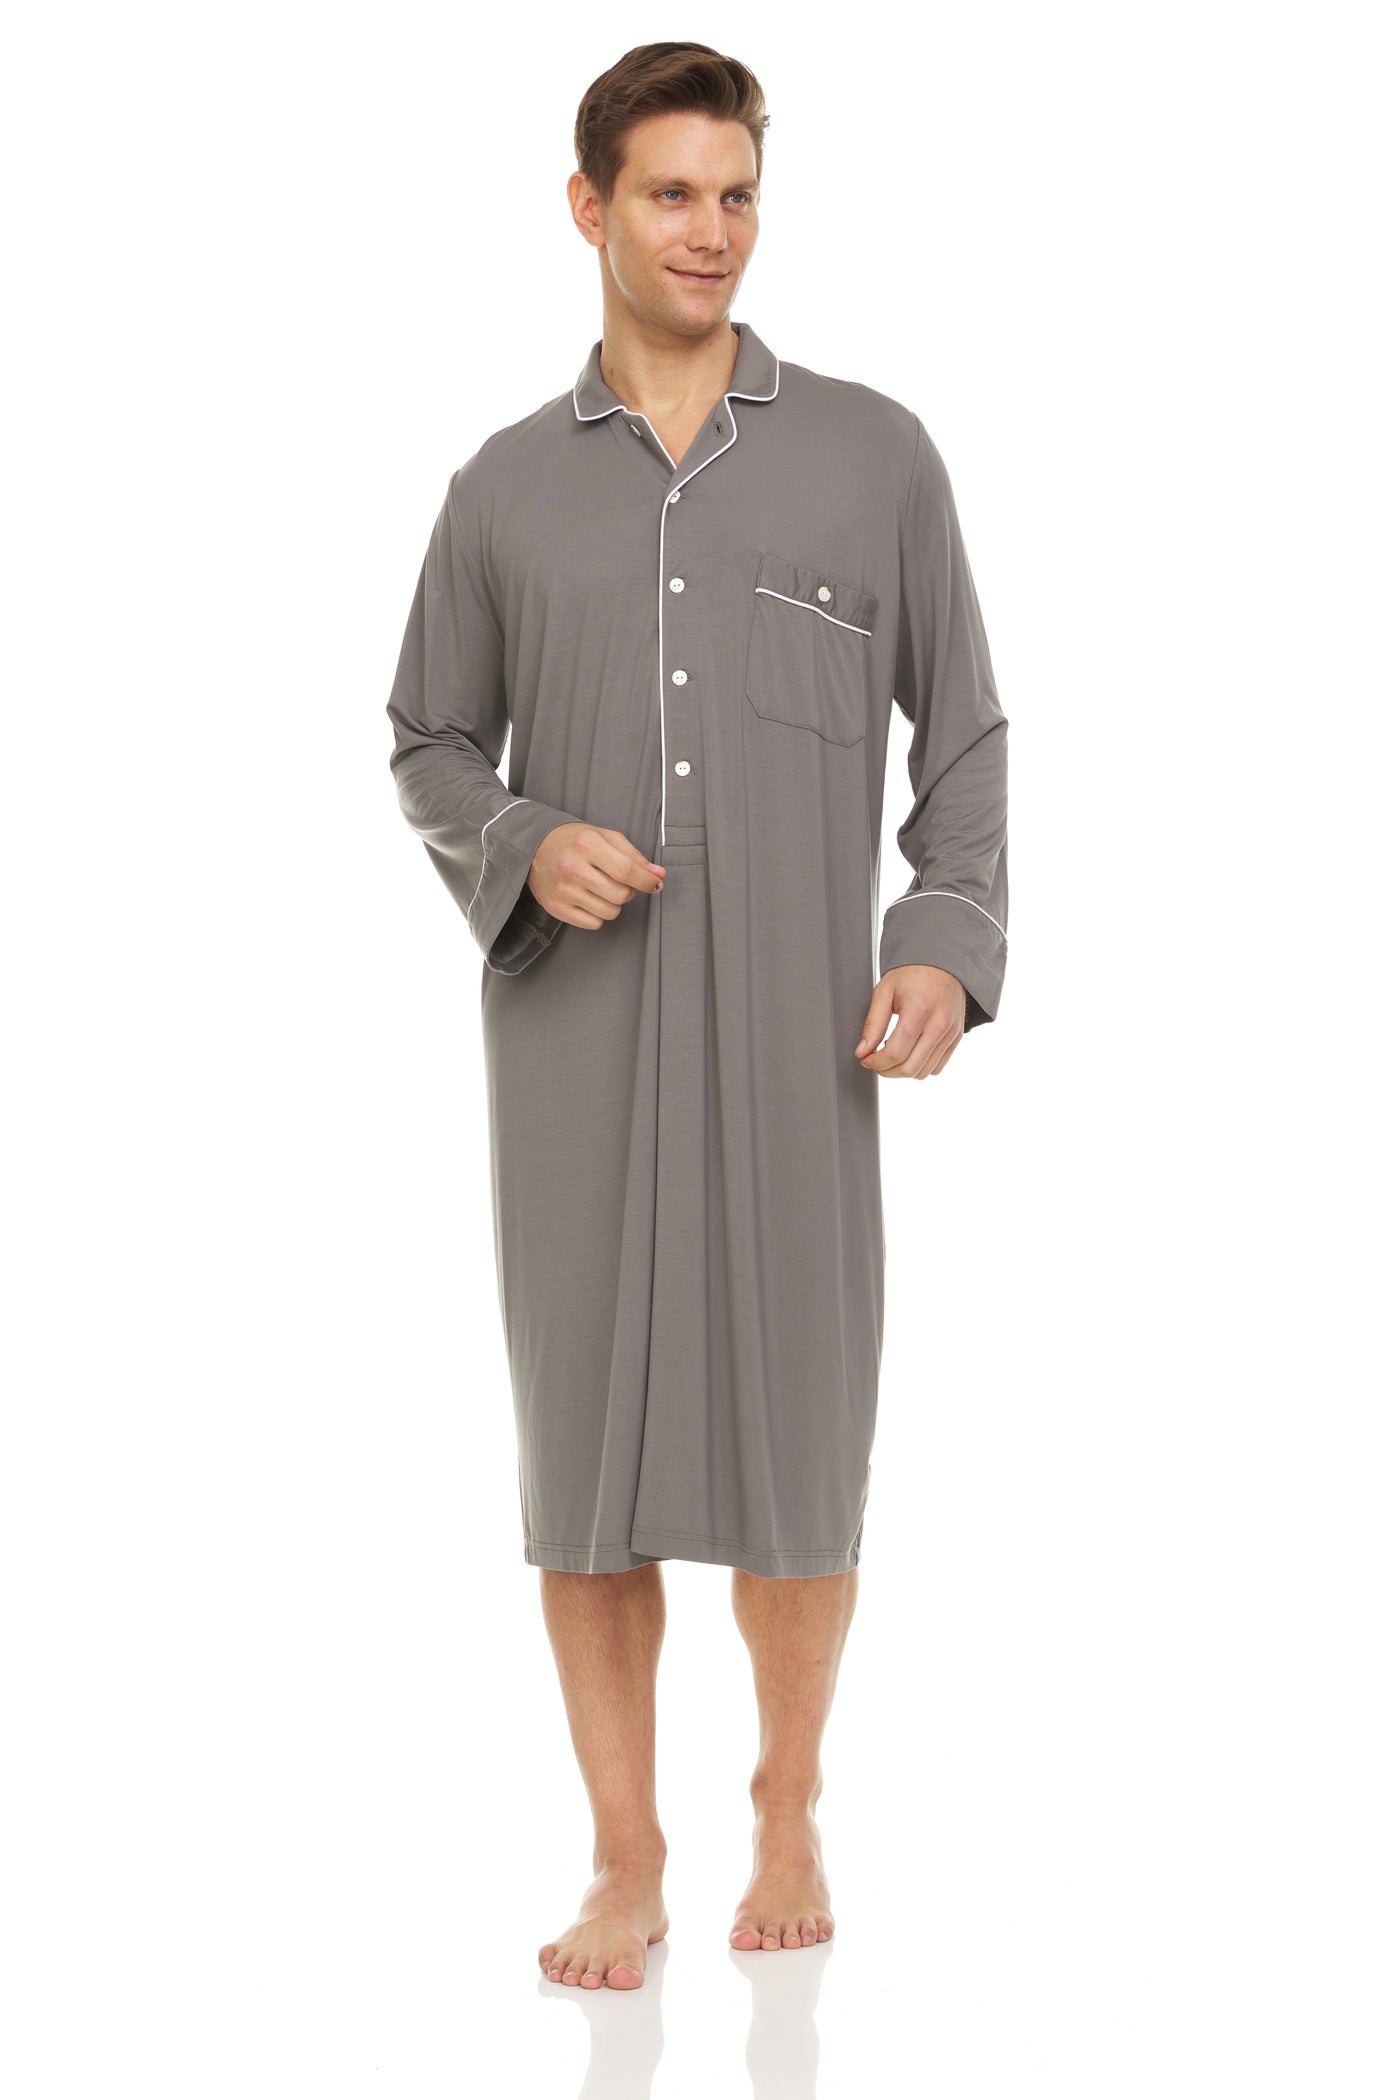 Men's Robes made with MicroModal